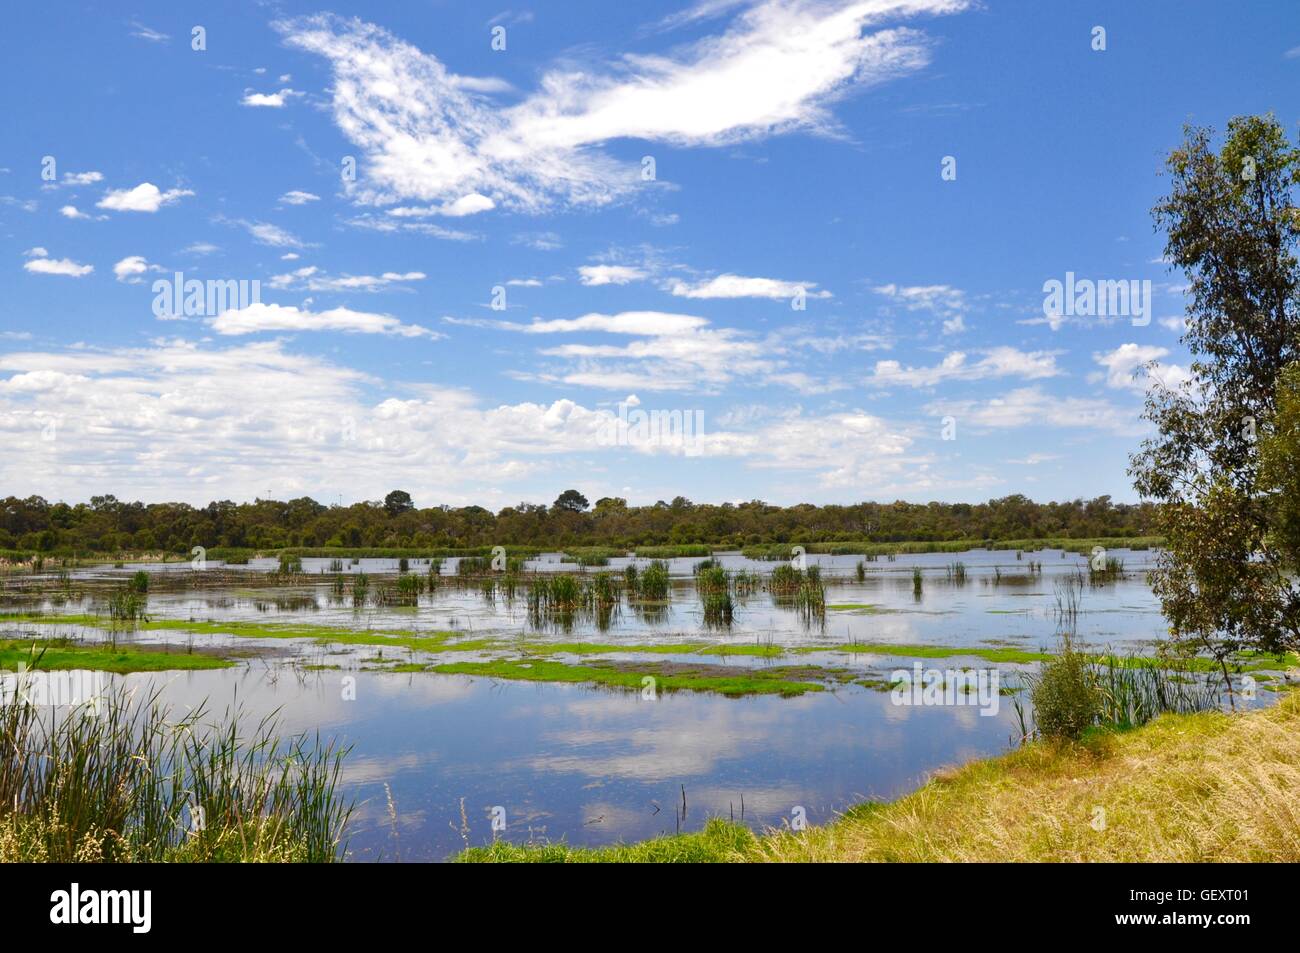 Floating wetland vegetation with reeds, mudflats and treed border at the Beelier Wetlands in Bibra Lake, Western Australia. Stock Photo